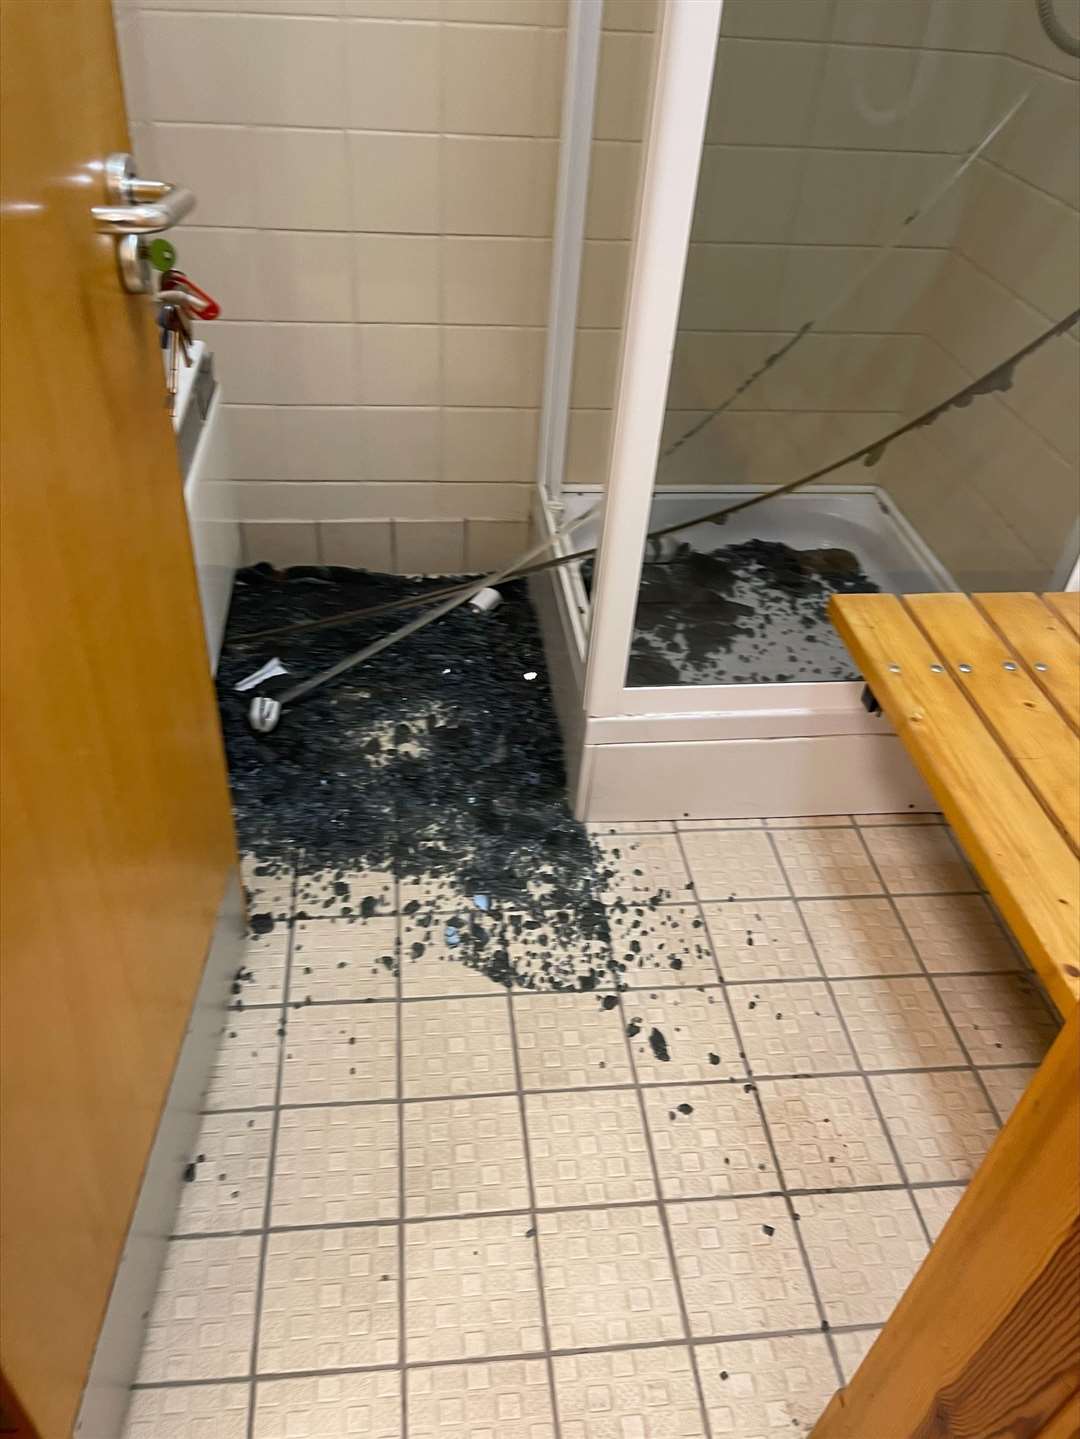 A newly-refurbished shower unit was trashed in the attack.